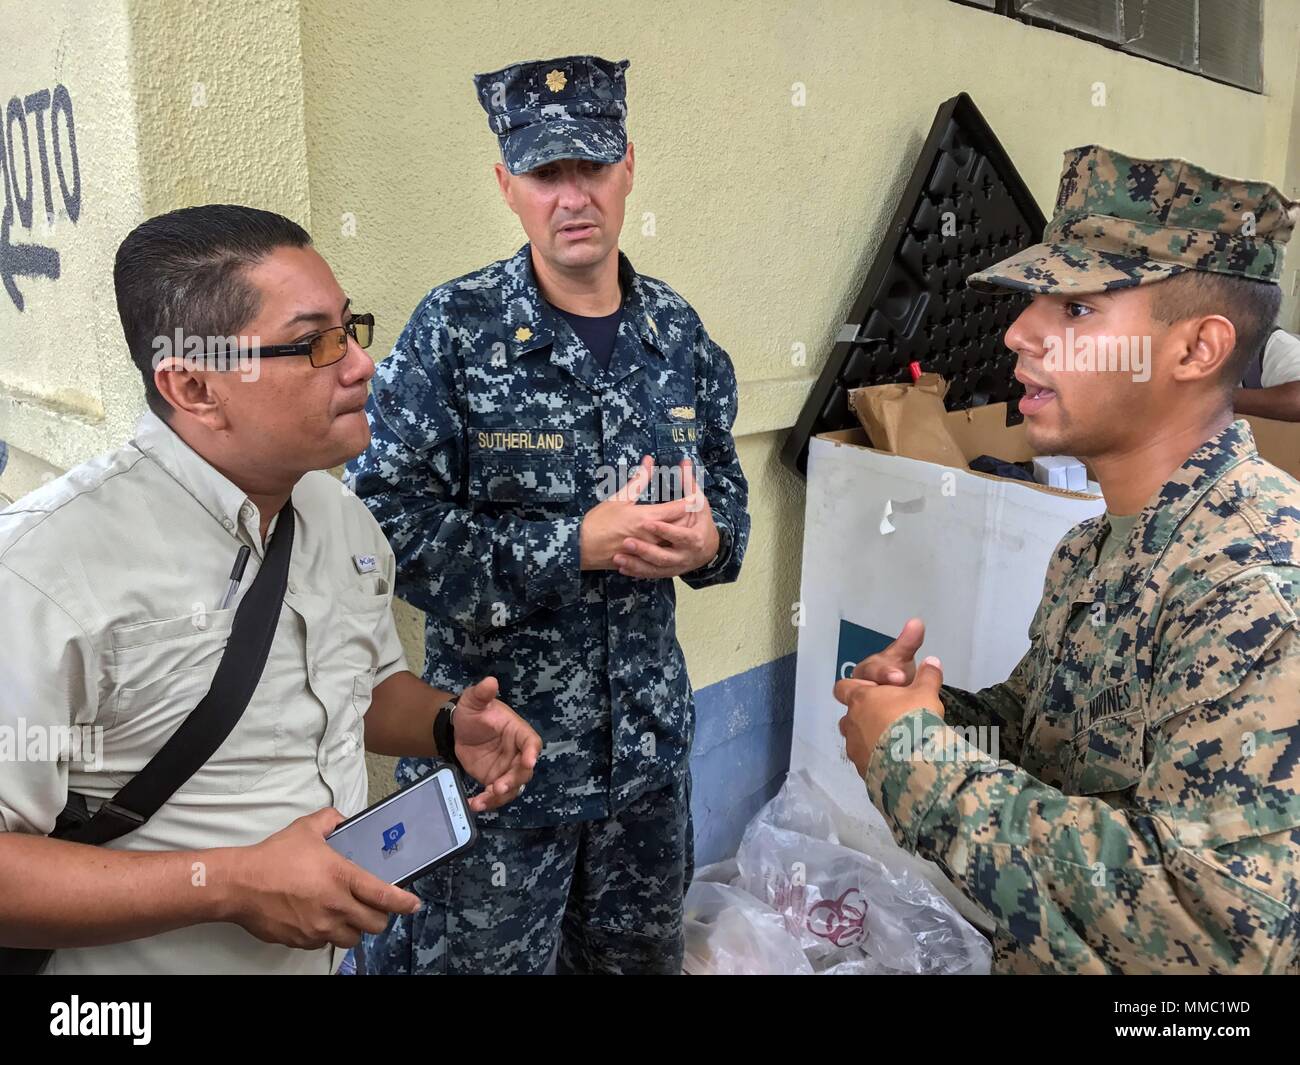 171006-A-QE286-0005 PUERTO BARRIOS, Guatemala (Oct. 6, 2017) Marine Lance Cpl. Rafael Tavera, right, assigned to 8th Engineer Support Battalion, translates for Lt. Cmdr. Ian Sutherland, technical director for Navy Entomology Center of Excellence, as he speaks to a local entomologist at Clinico Salud Del Puerto Barrios, a local health clinic, during Southern Partnership Station 17 (SPS 17). SPS 17 is a U.S. Navy deployment executed by U.S. Naval Forces Southern Command/U.S. 4th Fleet, focused on subject matter expert exchanges with partner nation militaries and security forces in Central and So Stock Photo